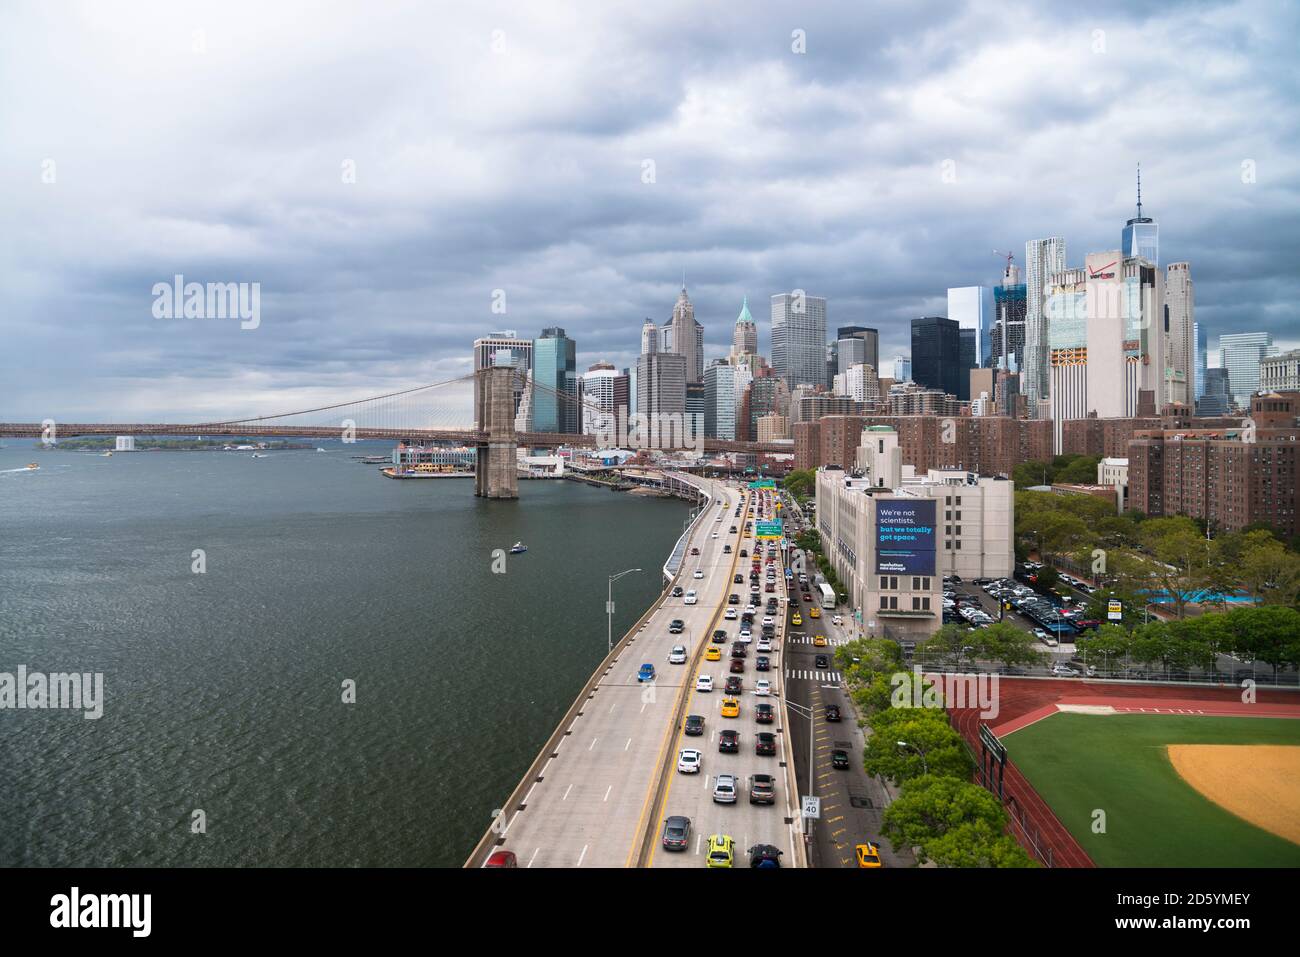 USA, New York City, FDR Drive with Brooklyn Bridge in background Stock Photo